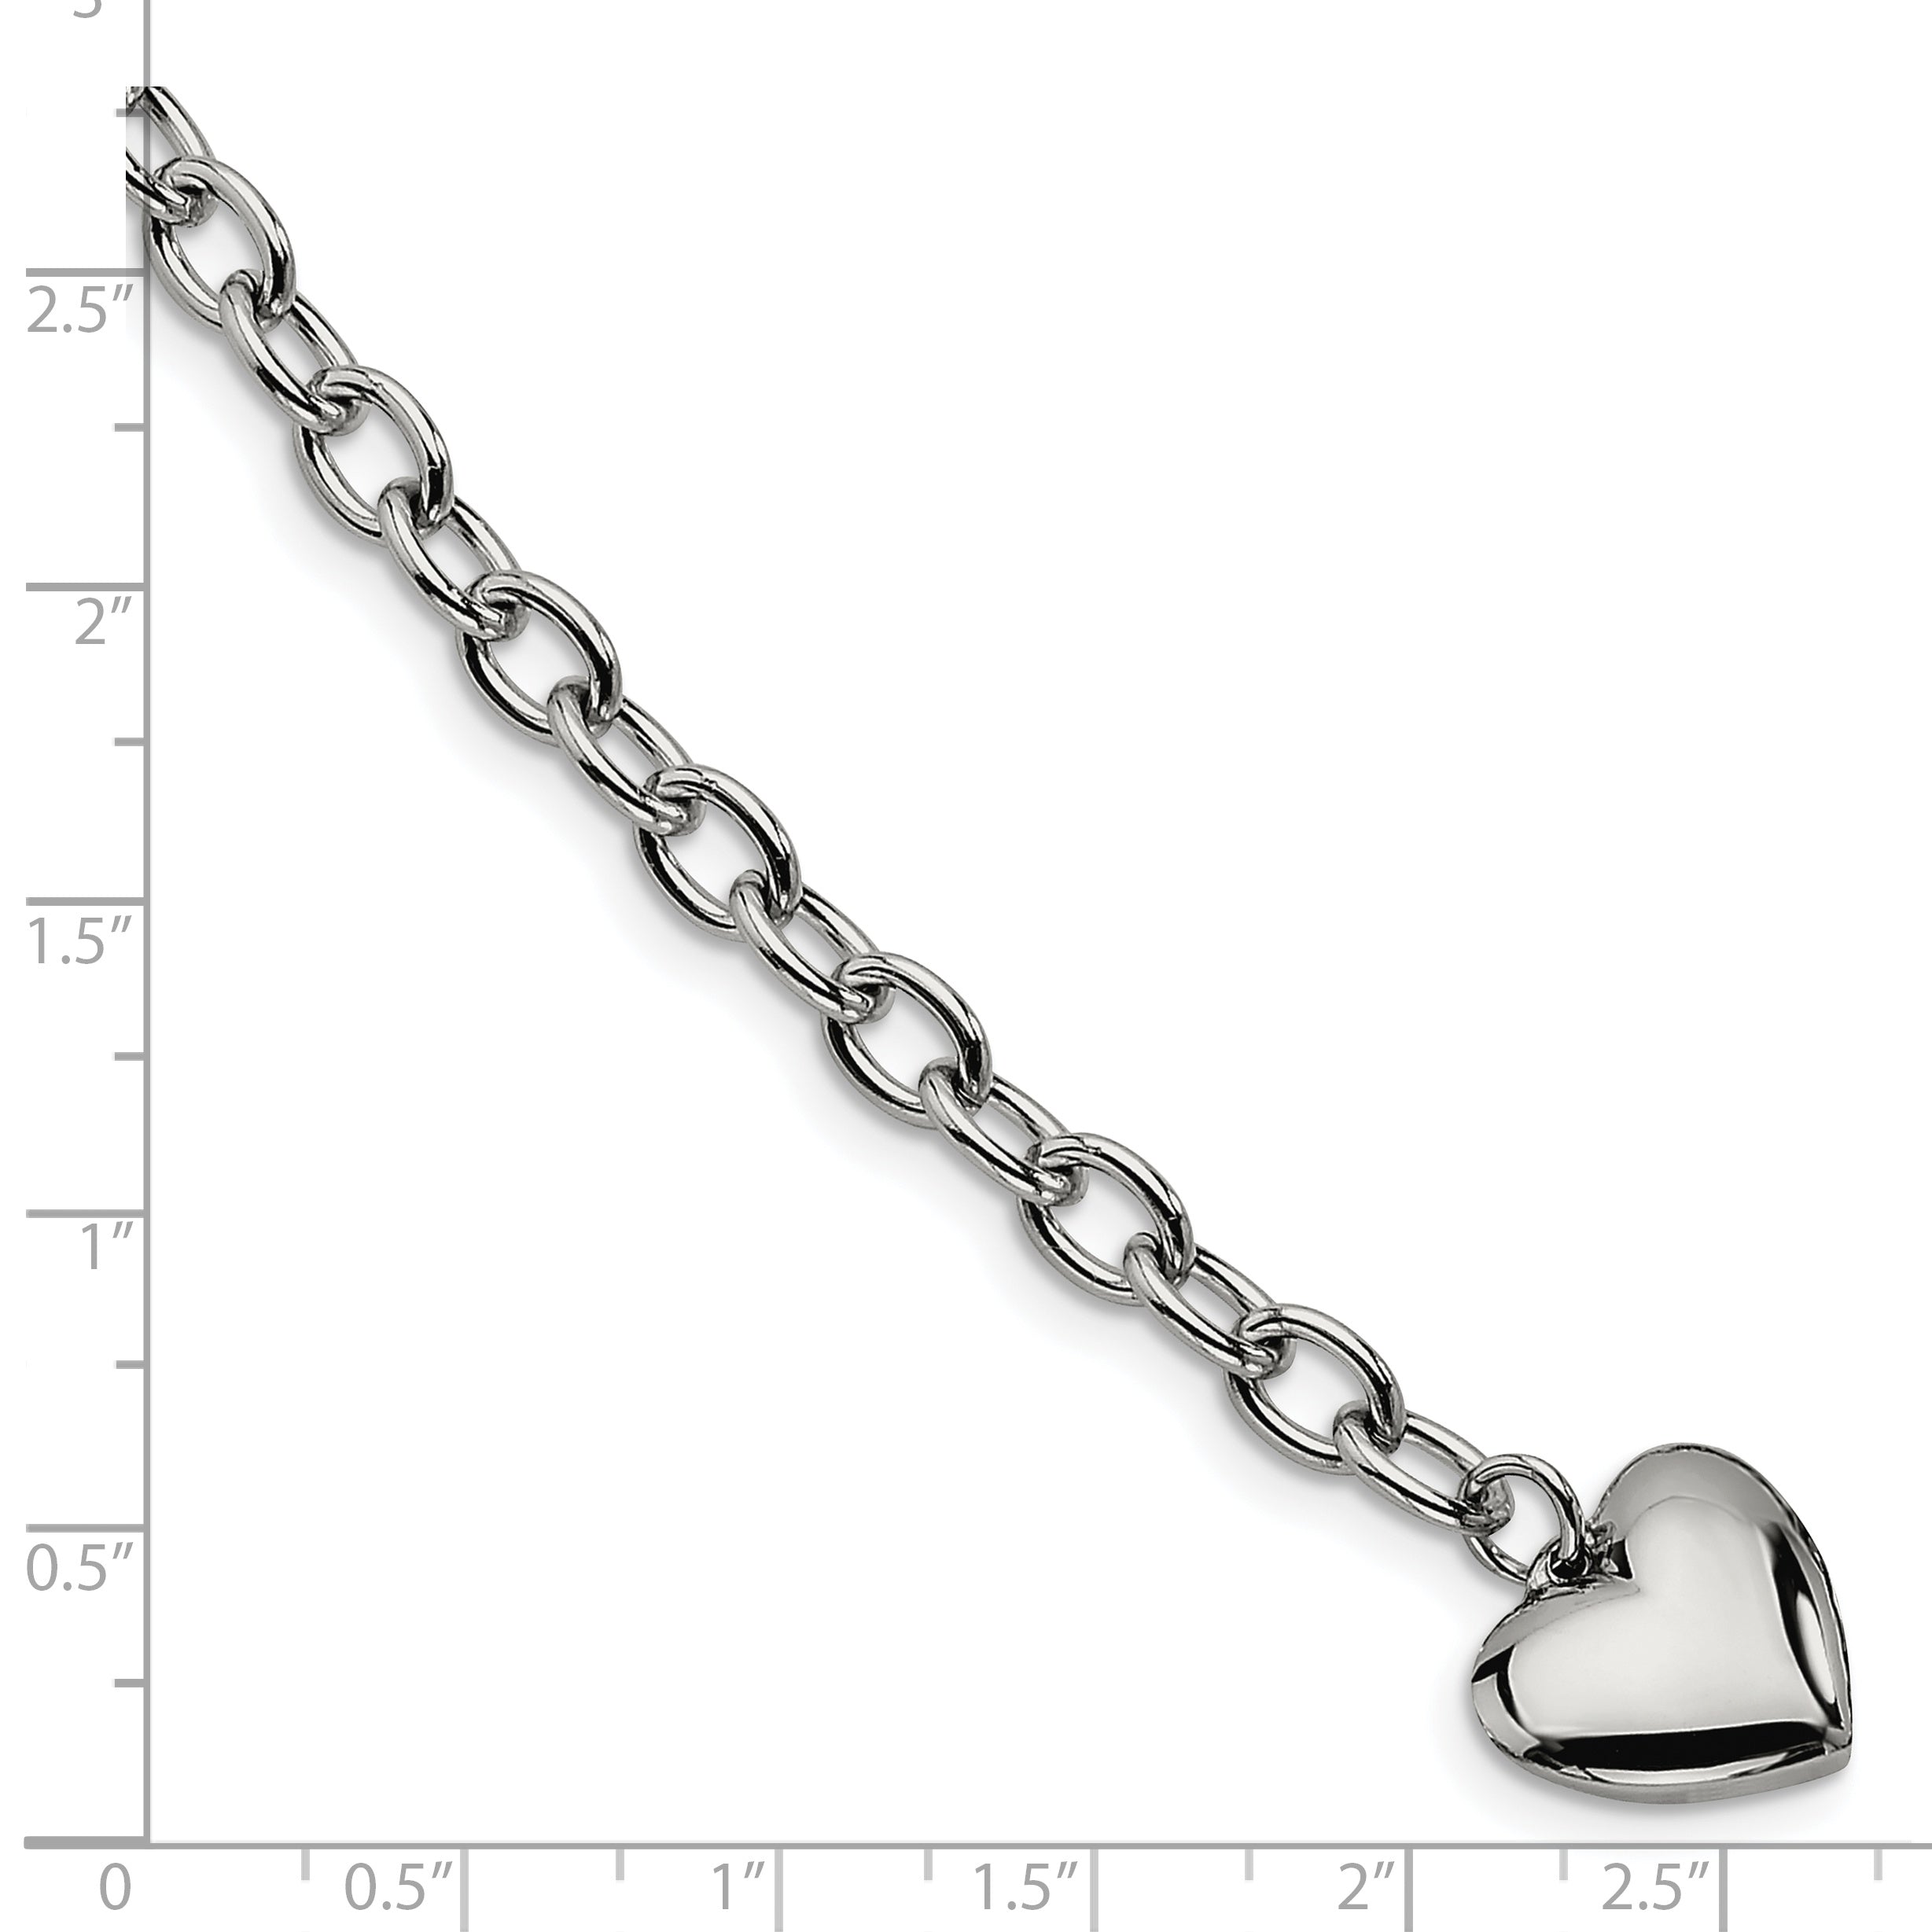 Chisel Stainless Steel Polished Open Link with Heart Dangle 8.5 inch Bracelet